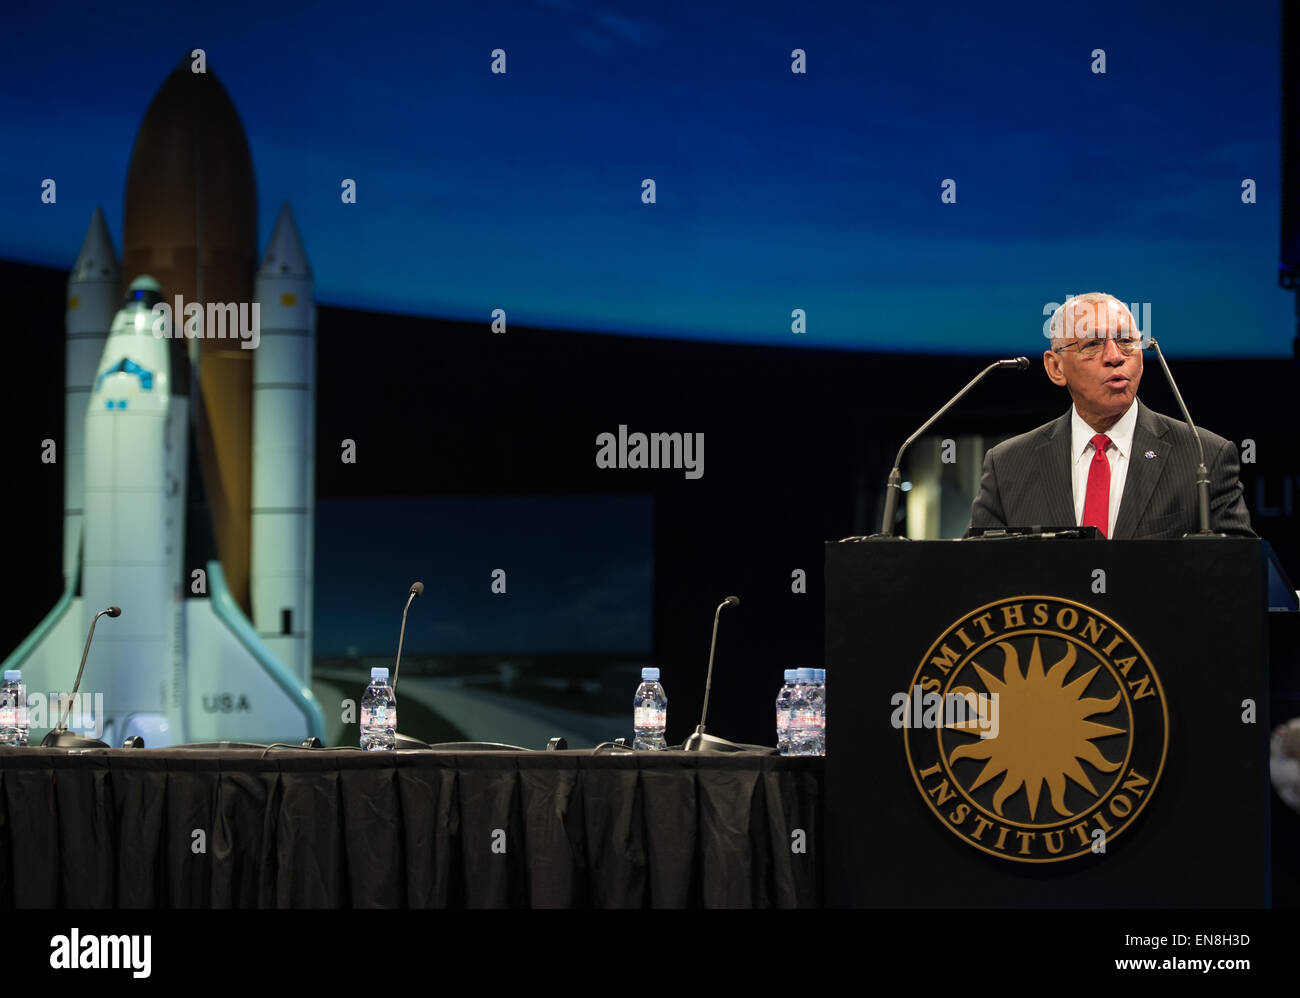 NASA Administrator Charles Bolden provides opening remarks for the &quot;NACA [National Advisory Committee for Aeronautics] Centenary: A Symposium on 100 Years of Aerospace Research and Development&quot; on March 3, 2015 at the National Air and Space Museum in Washington, DC. Congress established NACA on March 3, 1915 to address and find solutions to problems with flight. In 1958, the NACA staff, research facilities, and know-how were transitioned to the new NASA. Stock Photo